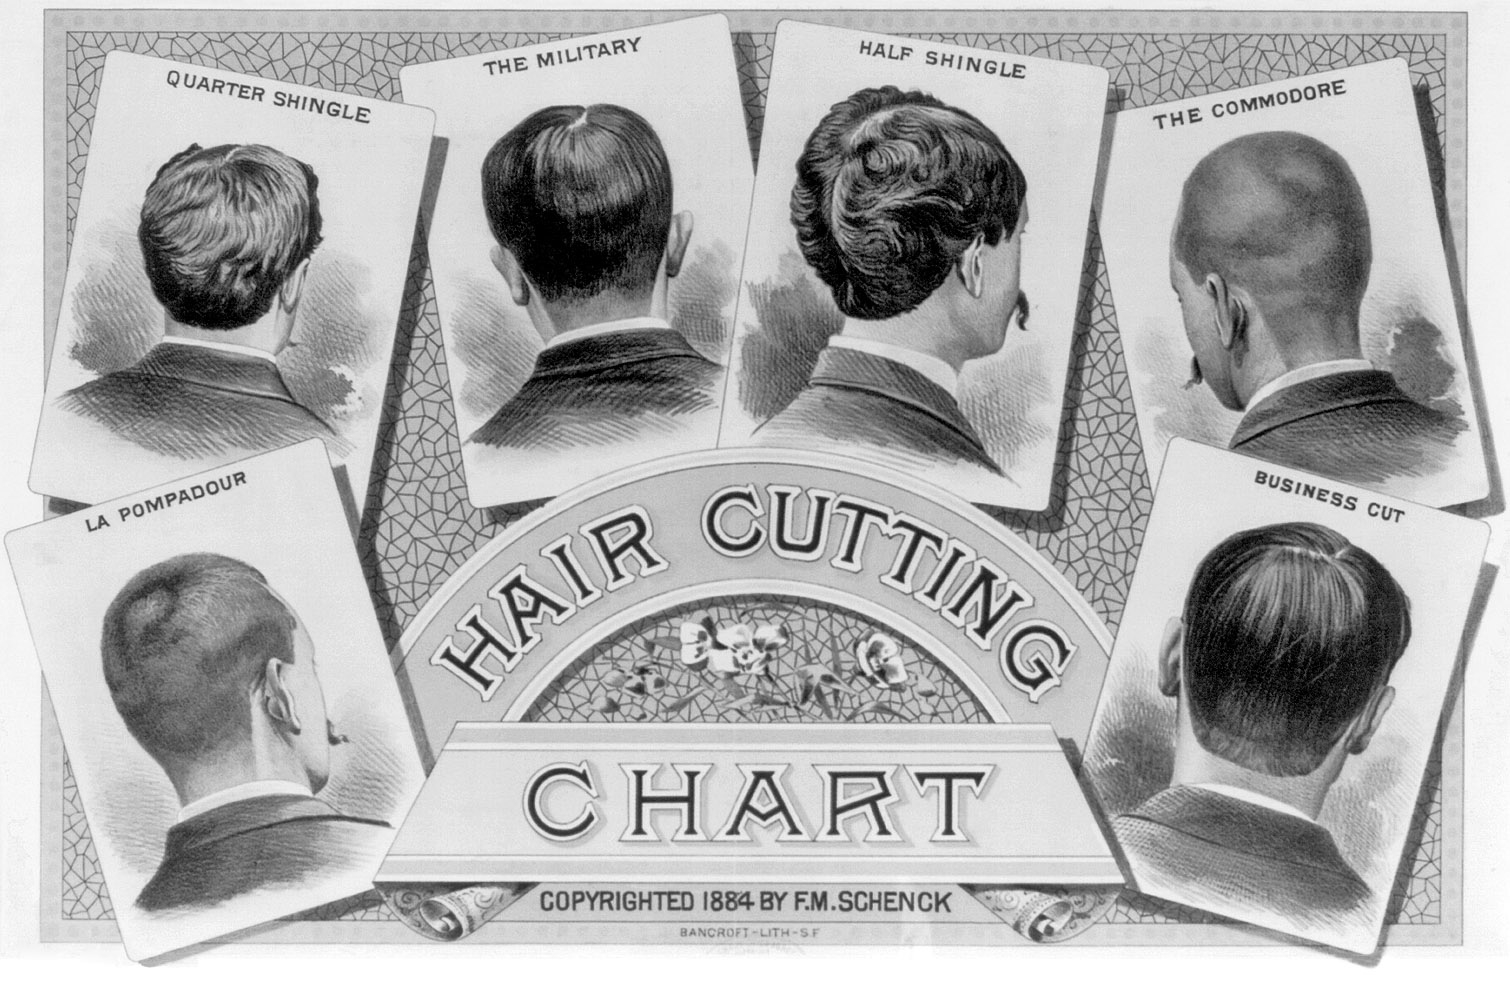 Hair Cutting Chart From 1884 - The Strand Barber Shop Morocco Hair Cut Chart